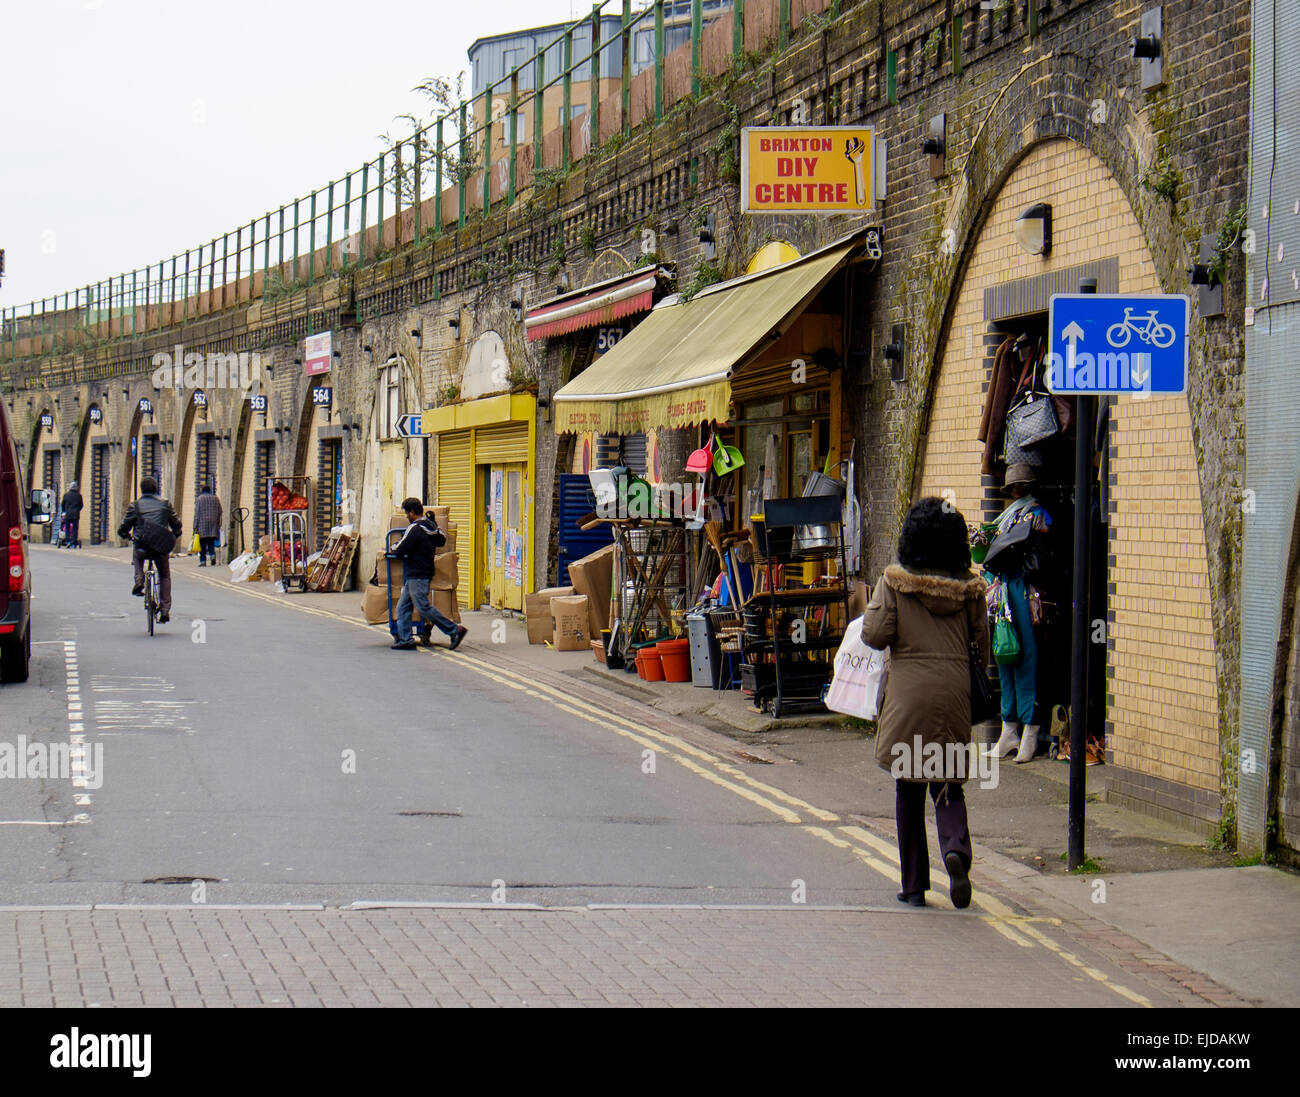 March 2015: Business premises in Brixton Station Road under Brixton railway arches threatened with eviction Stock Photo